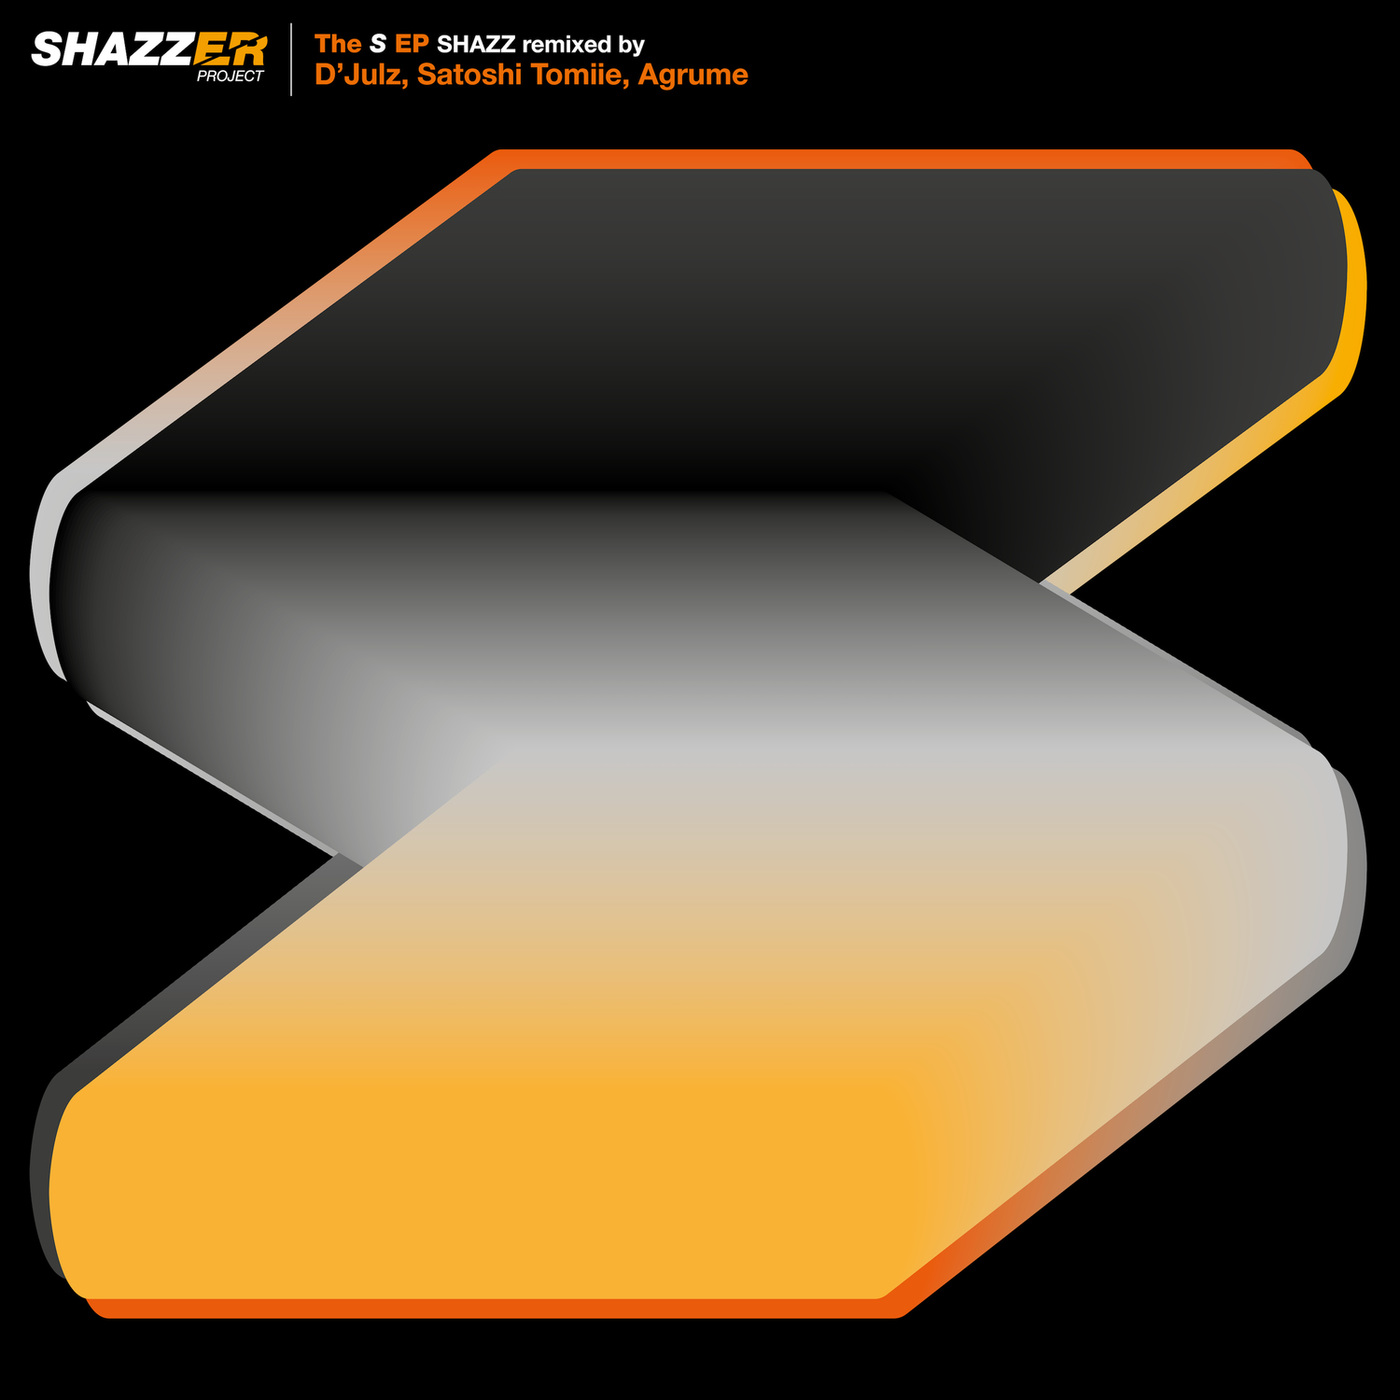 Shazz - Shazzer Project / Electronic Griot